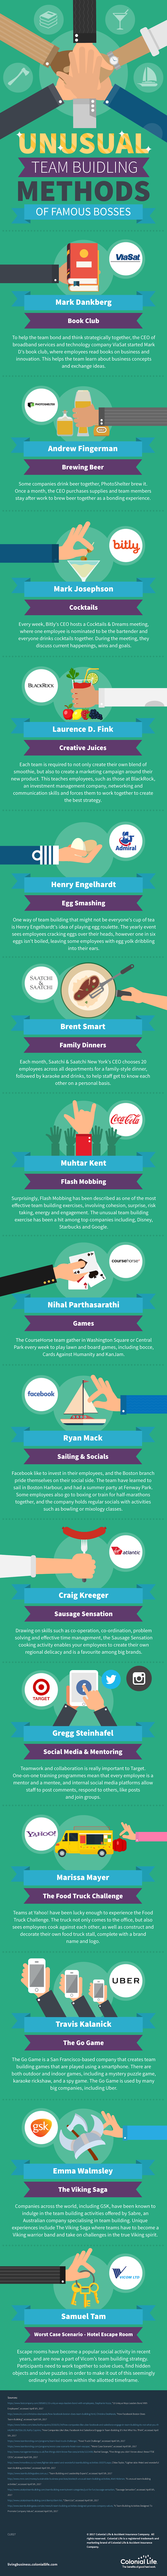 The Unusual Team Building Methods of Famous Bosses - #infographic